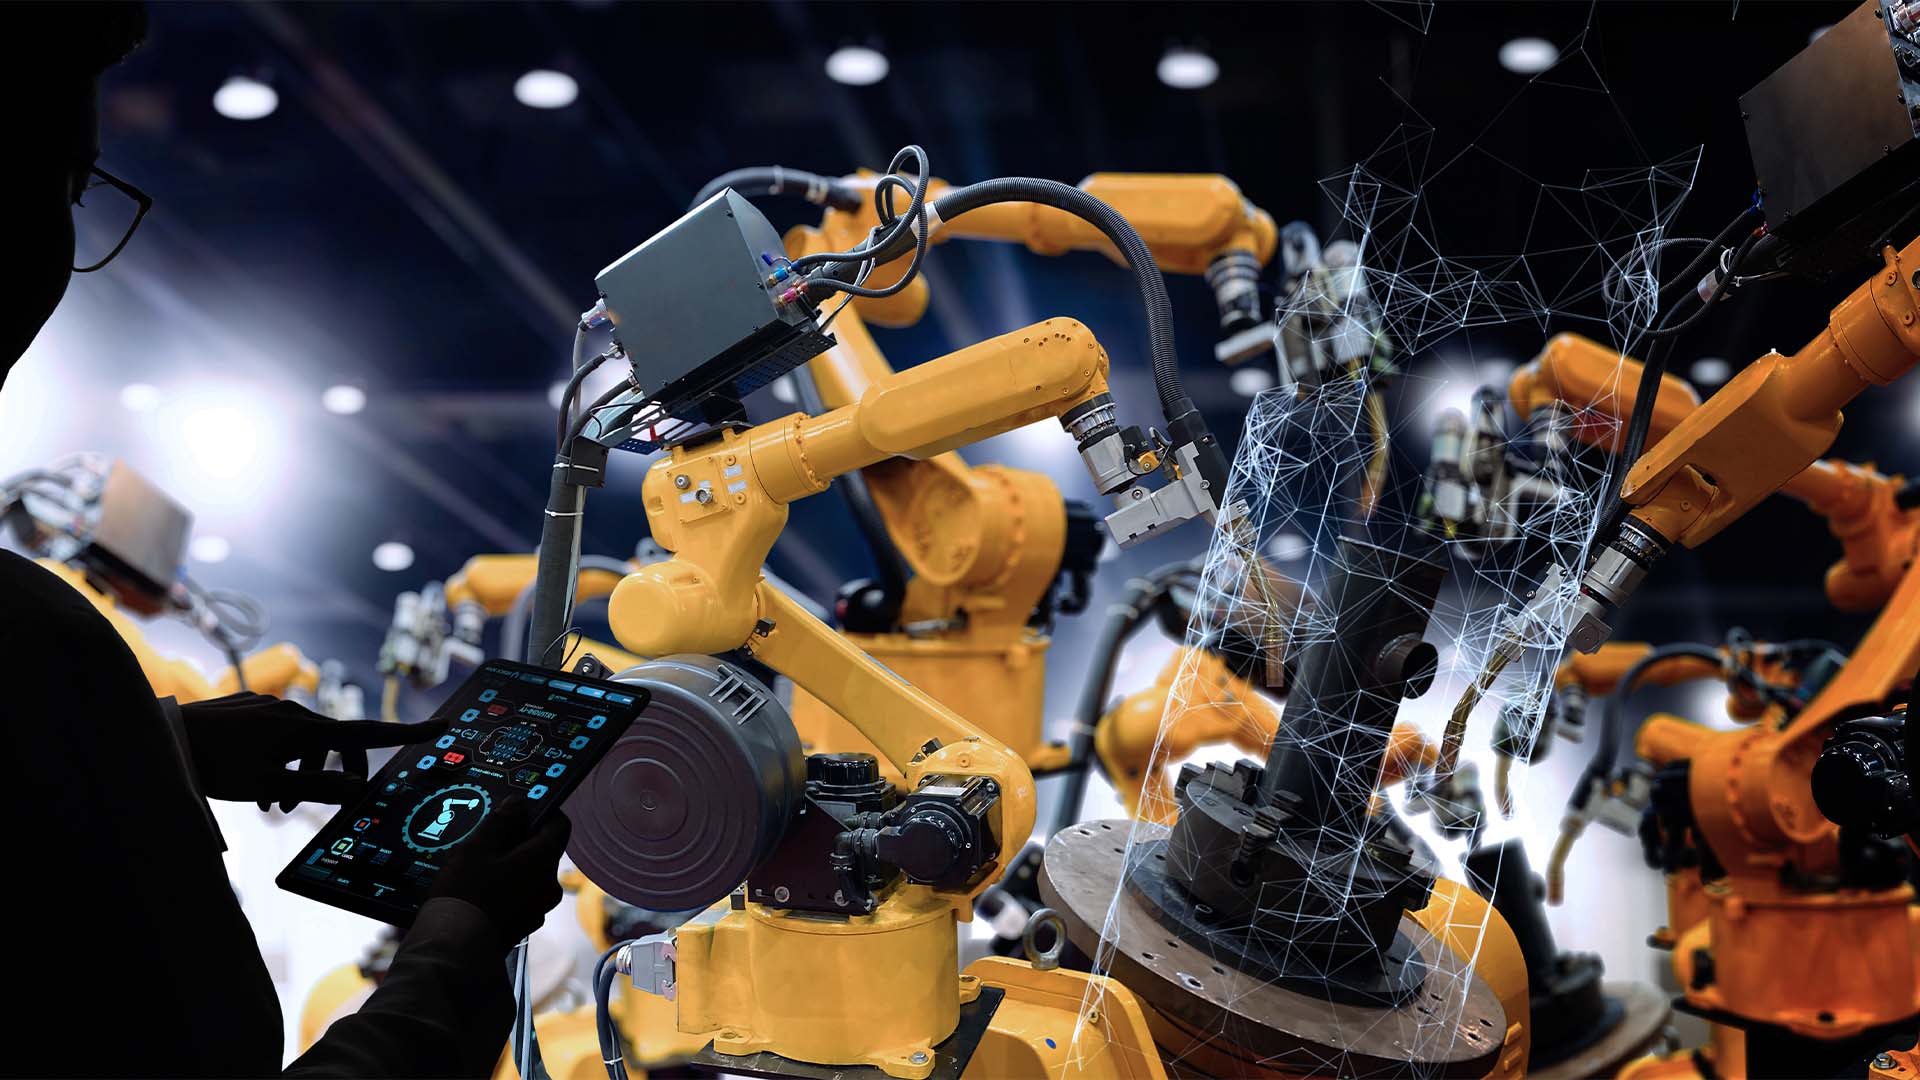 Operations in a manufacturing setting with robotics and artificial intelligence.